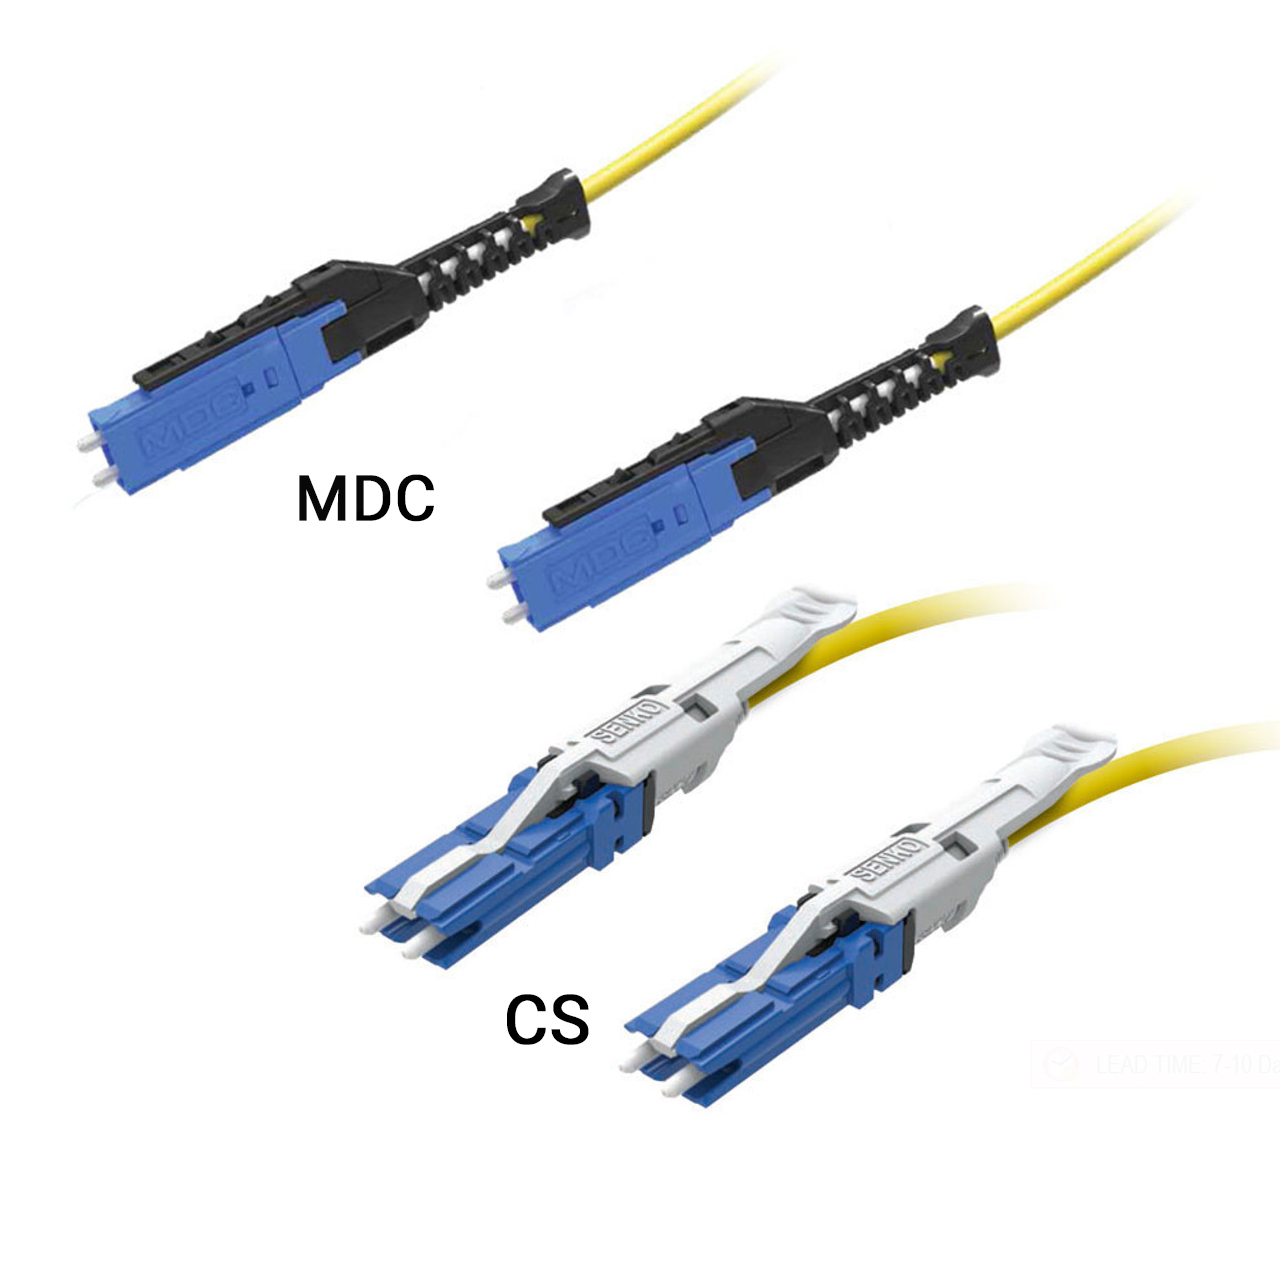 Fiber patch cables with MDC and CS connectors